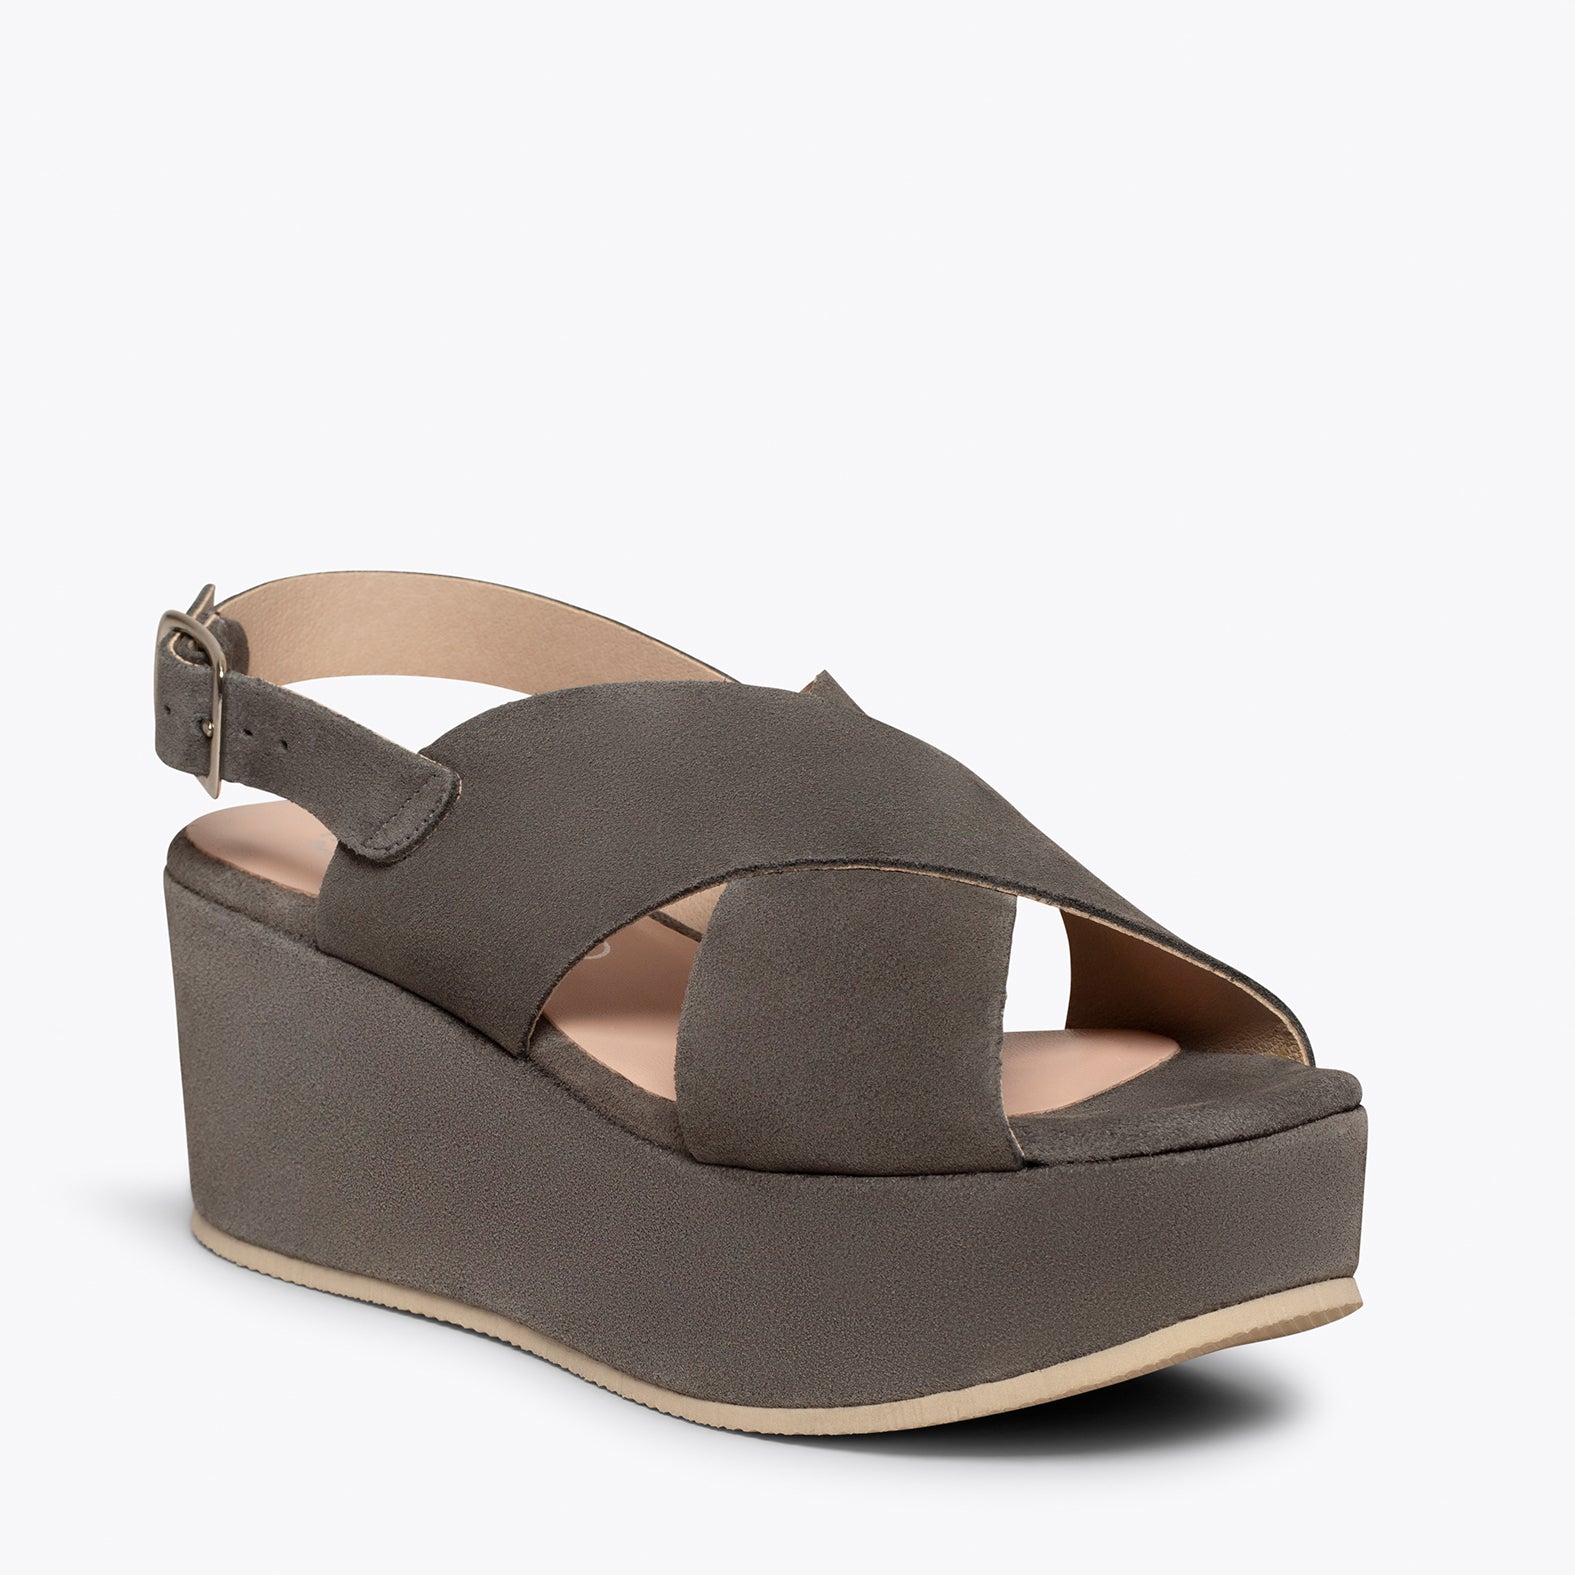 MARA – TAUPE suede platform with front straps